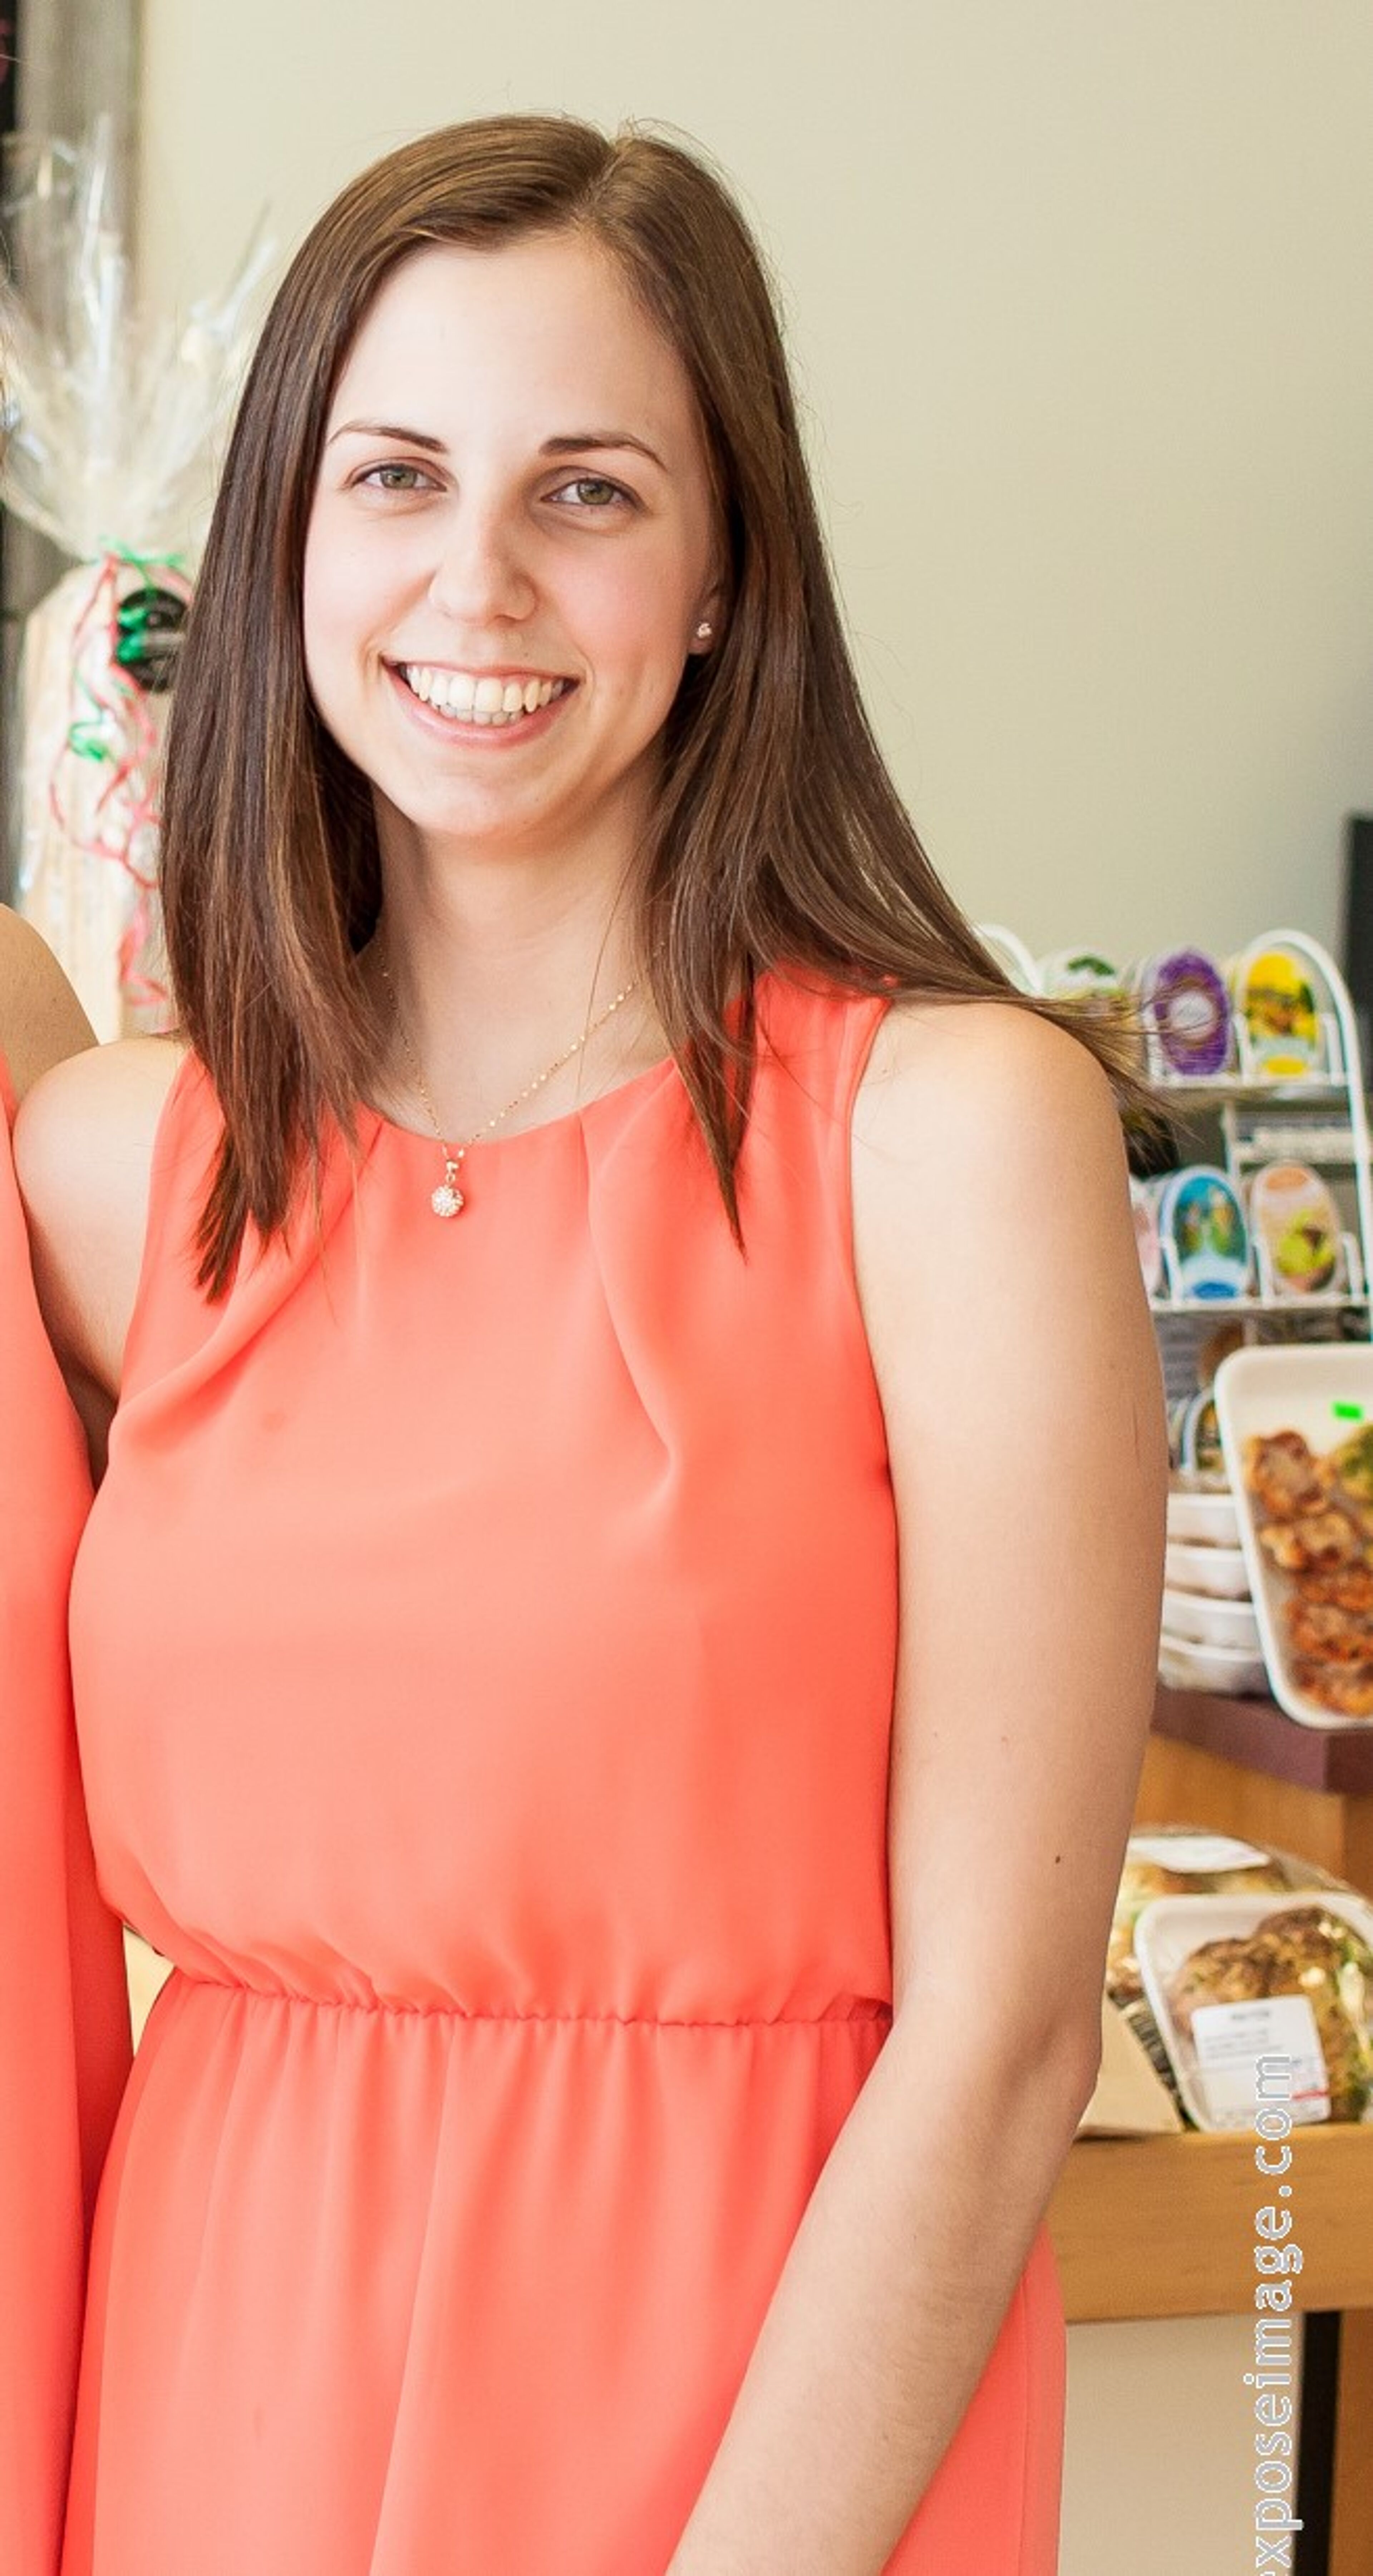 A cheerful young woman in a sleeveless coral dress with a delicate necklace stands in a room with a buffet in the background.